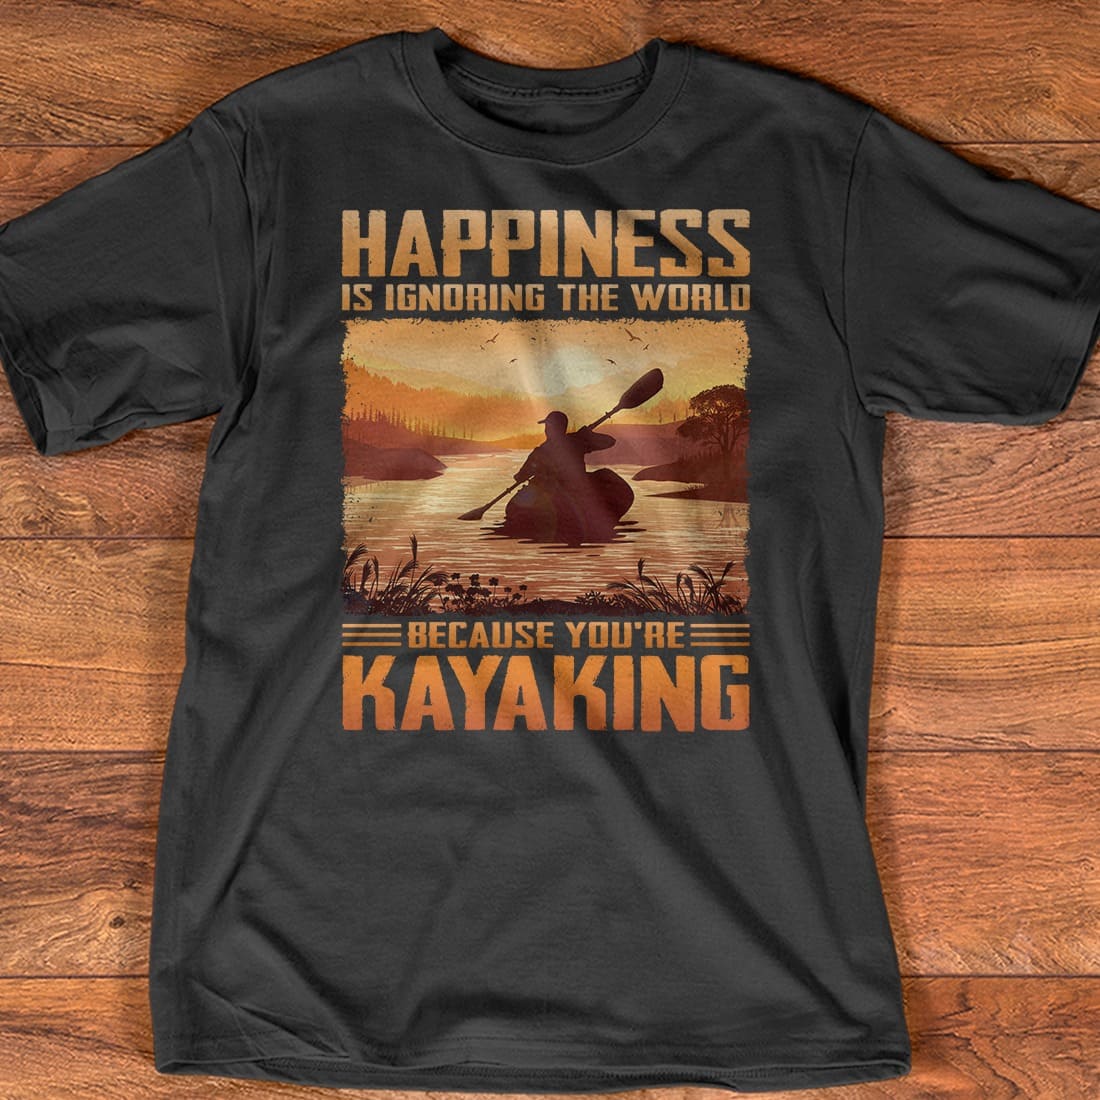 Happiness is ignoring the world because you're kayaking - Love to go kayaking, gift for kayaking person